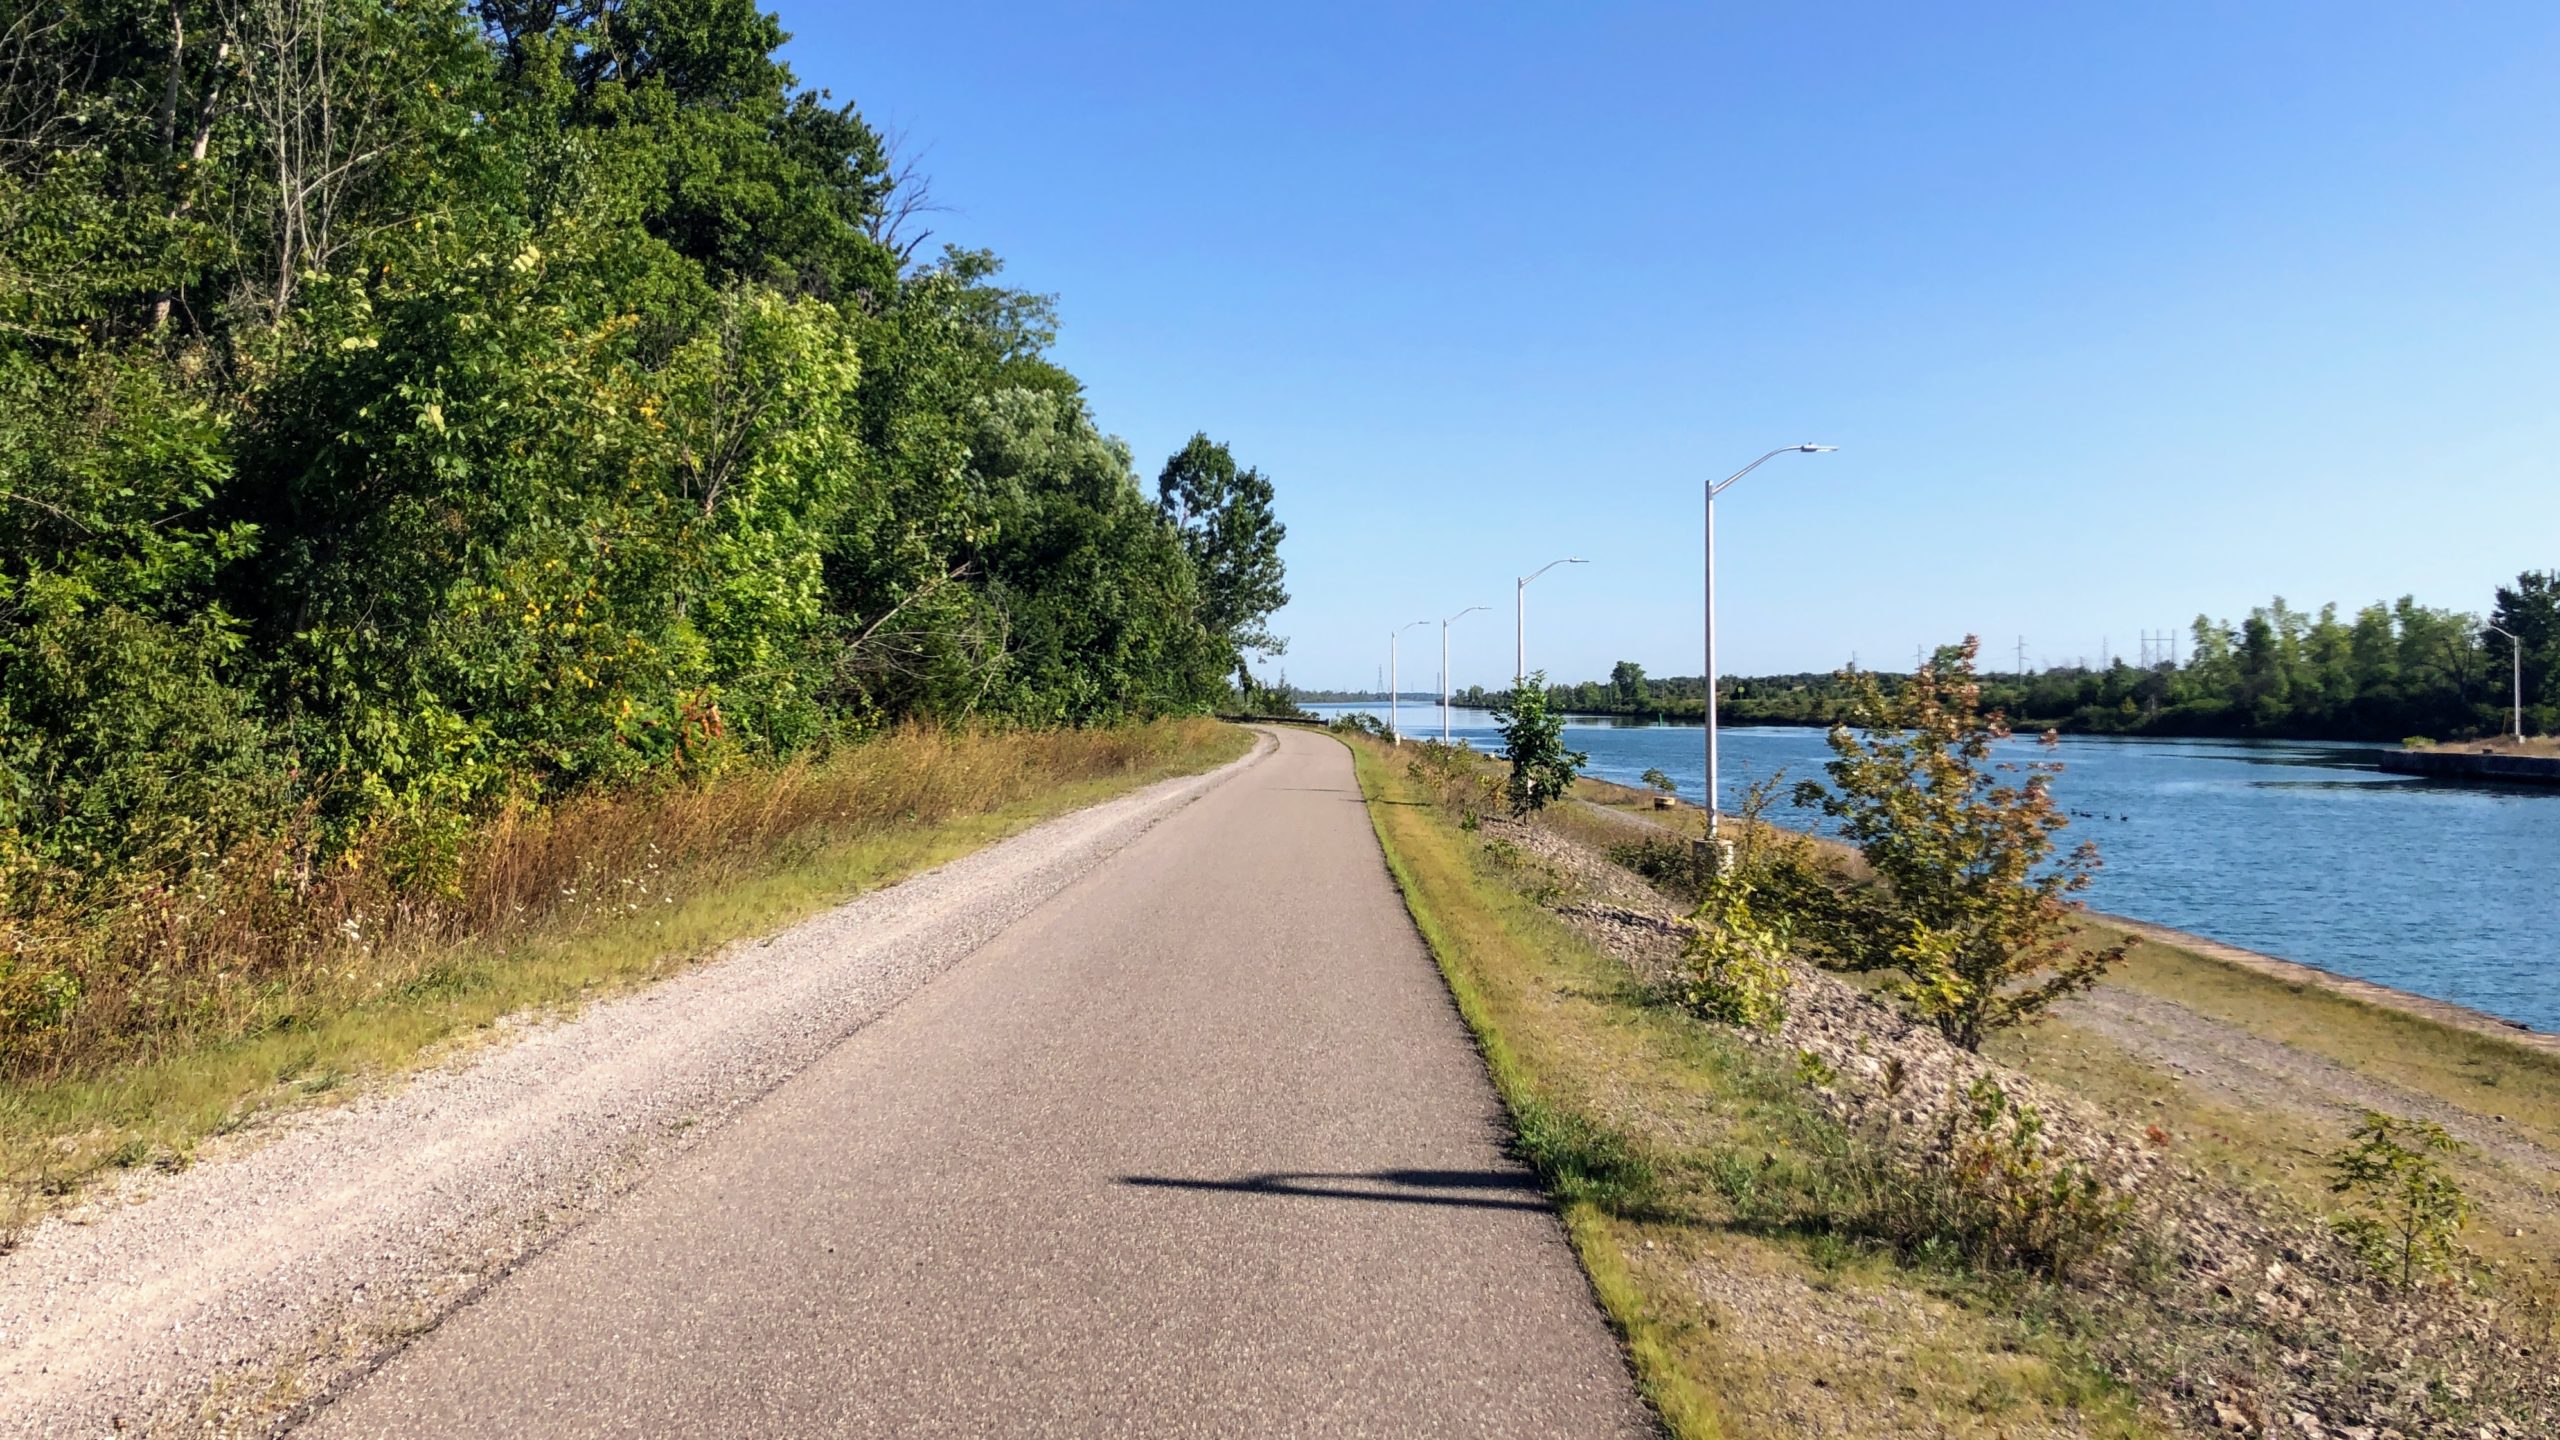 A typical section of trail along the Welland Canal.